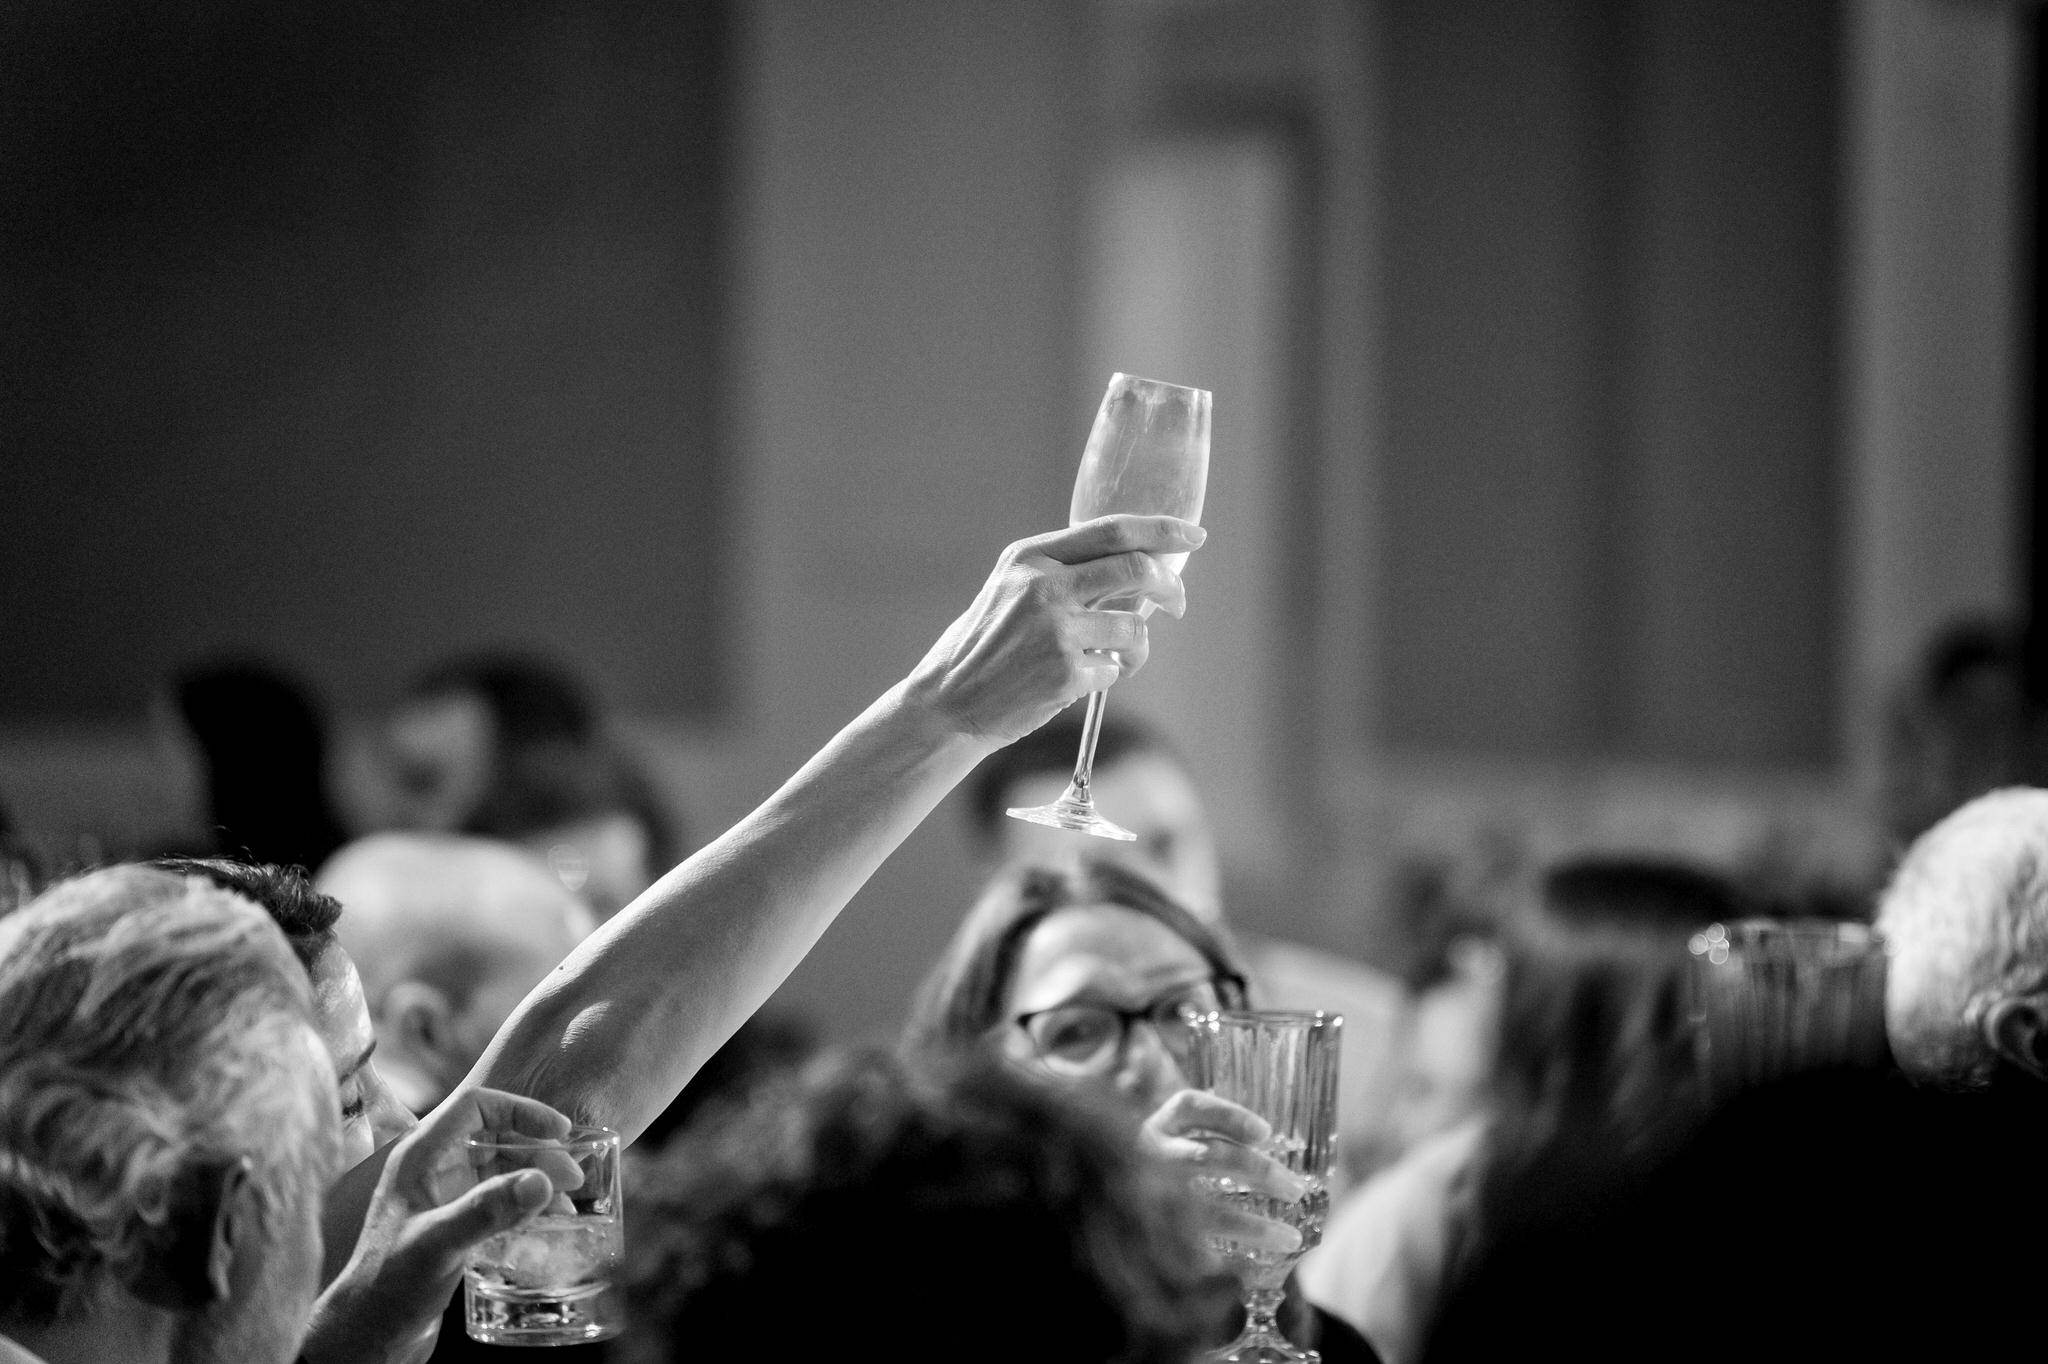 Guests raise a wine glass during wedding toasts.